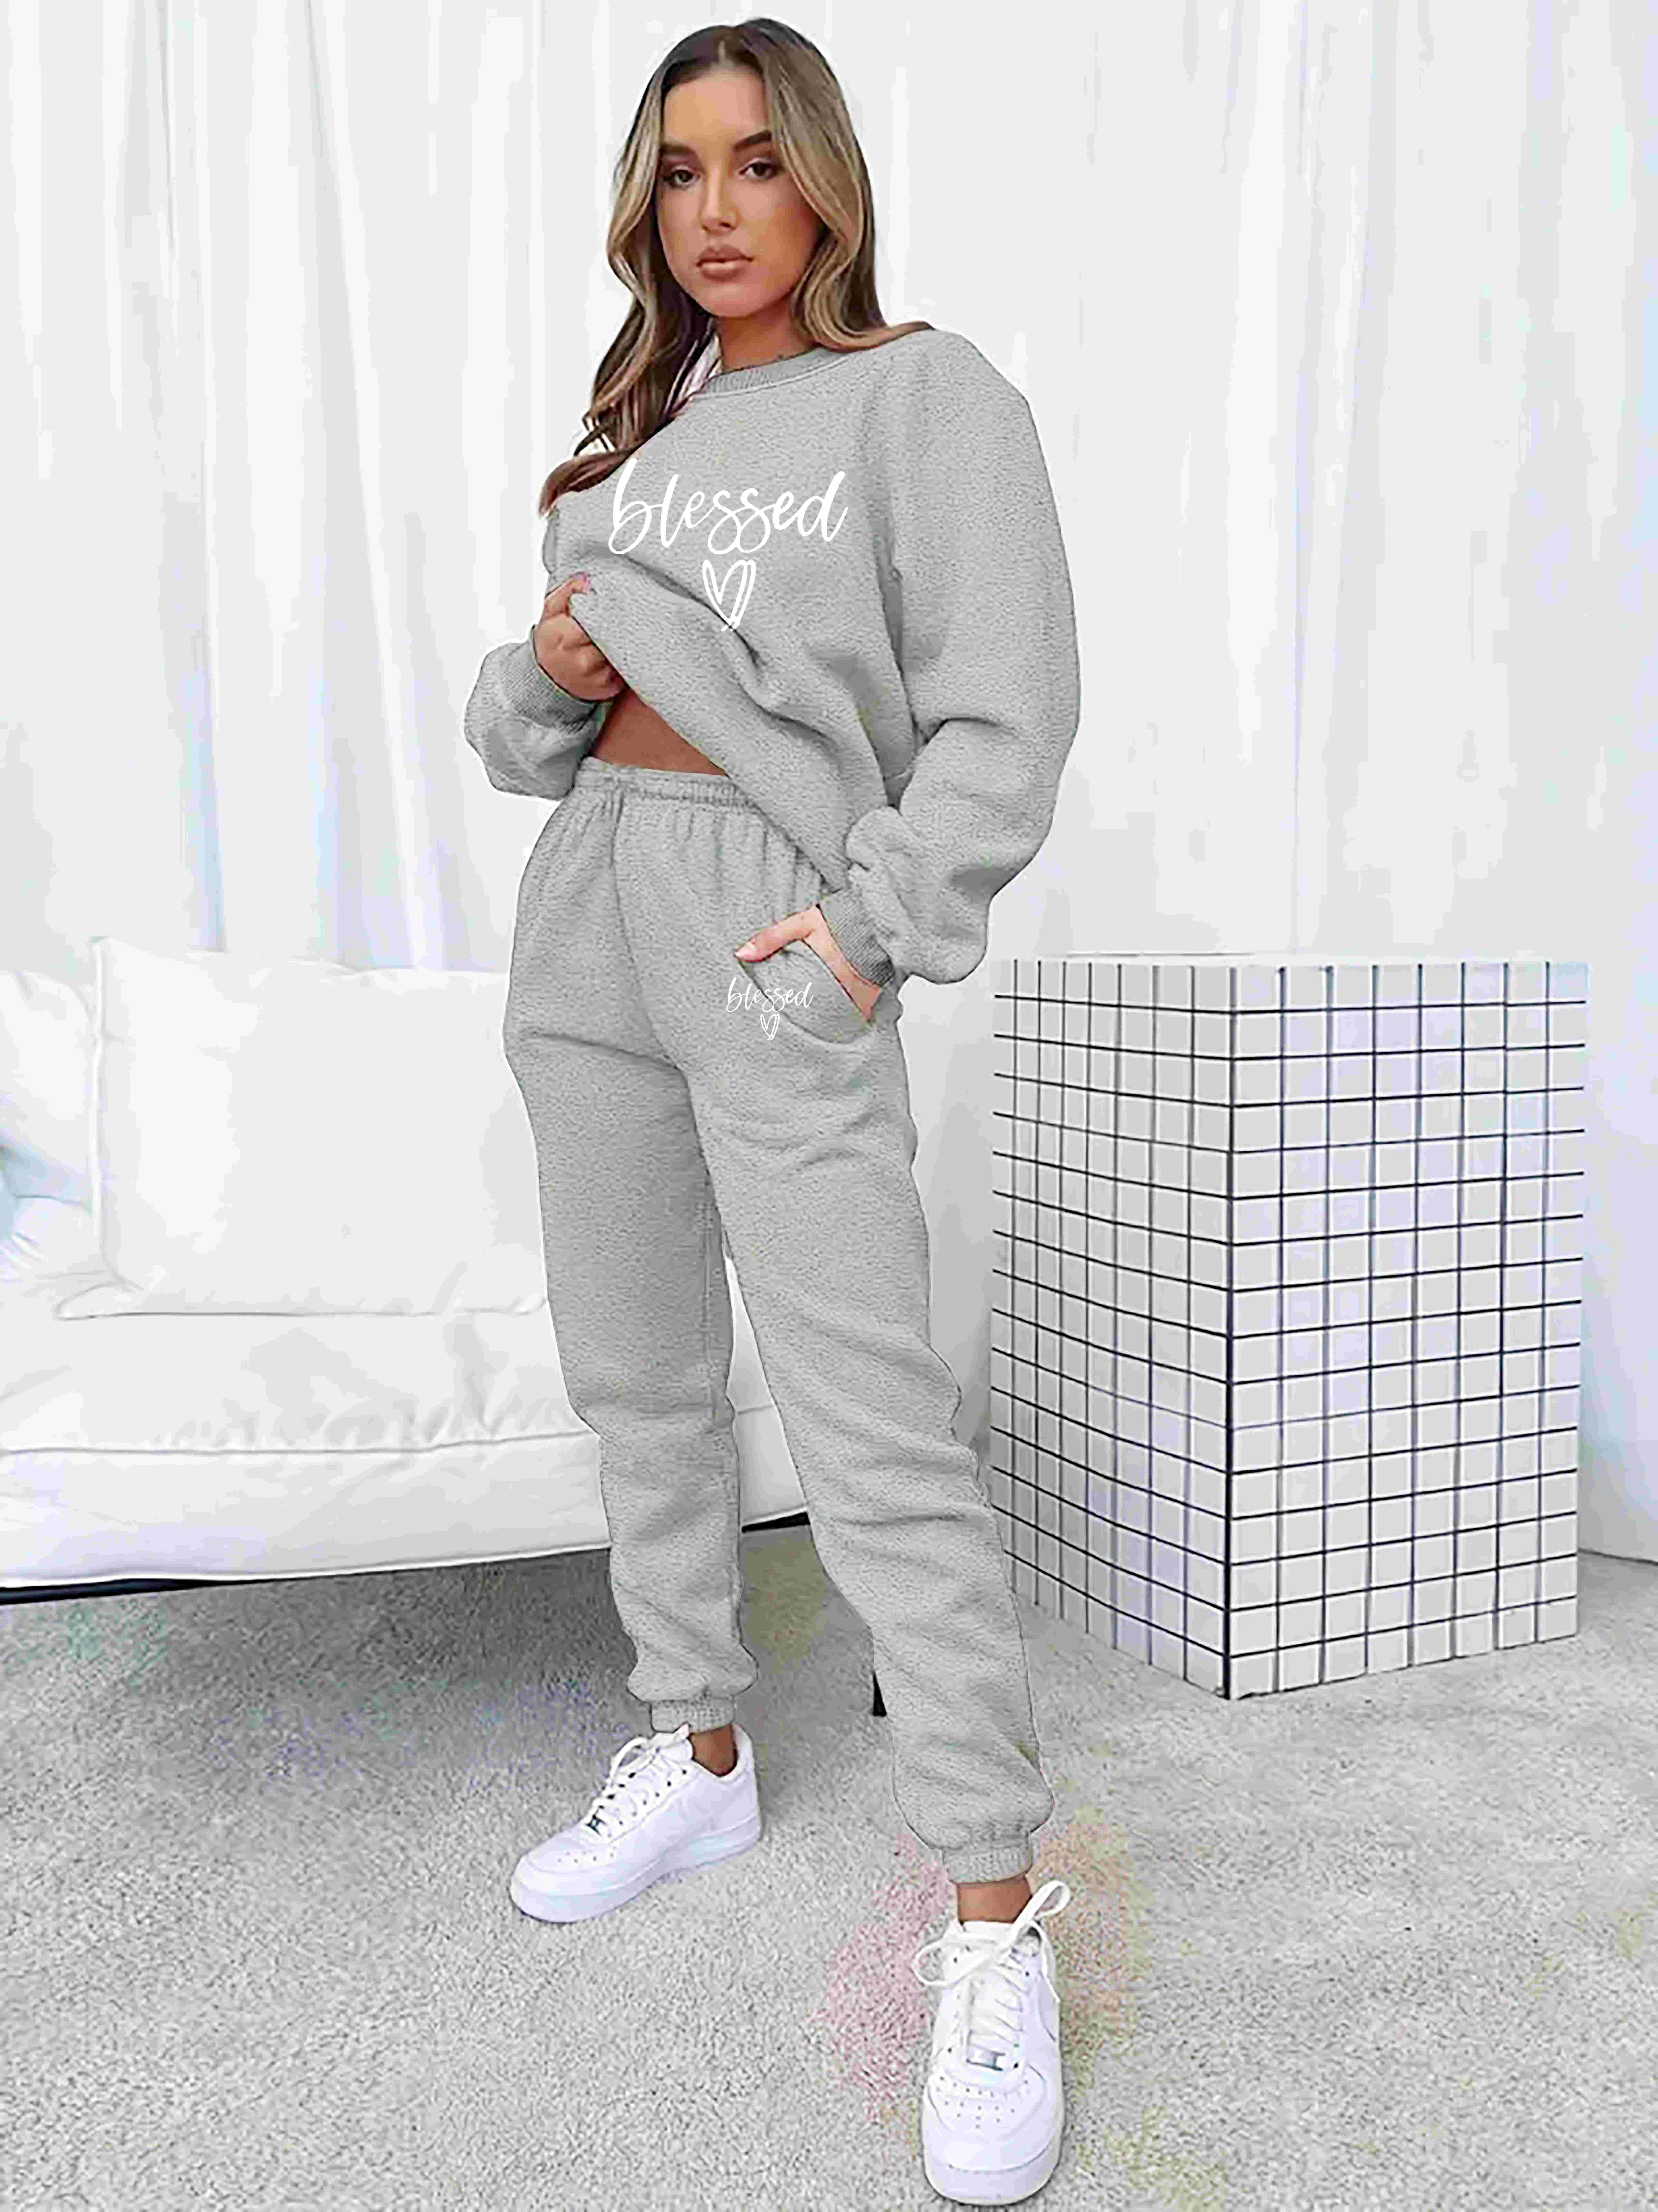  Sweat Shirt And Sweat Pants For Women,Casual Outfit